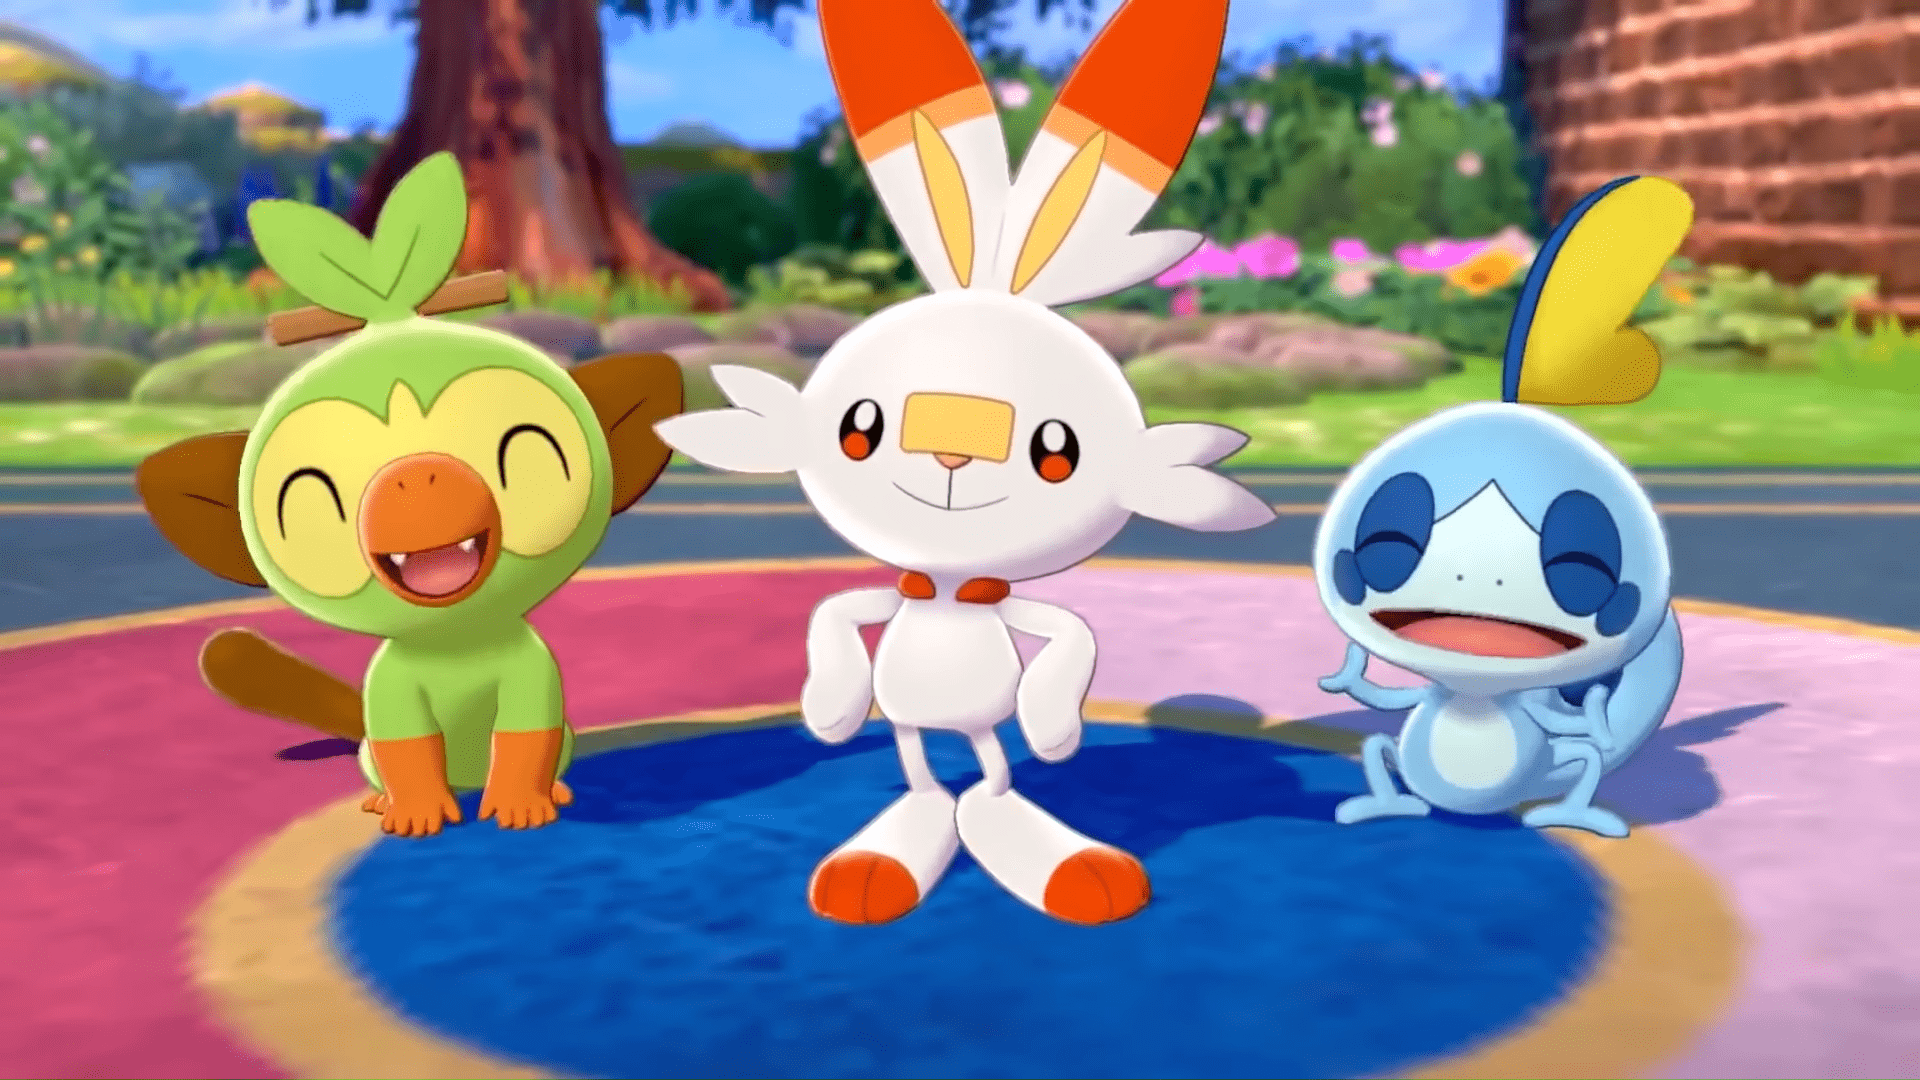 Nintendo Pens In The Next Pokemon Sword And Shield Direct For 1/9/2019 – What’s Next For Pokemon?